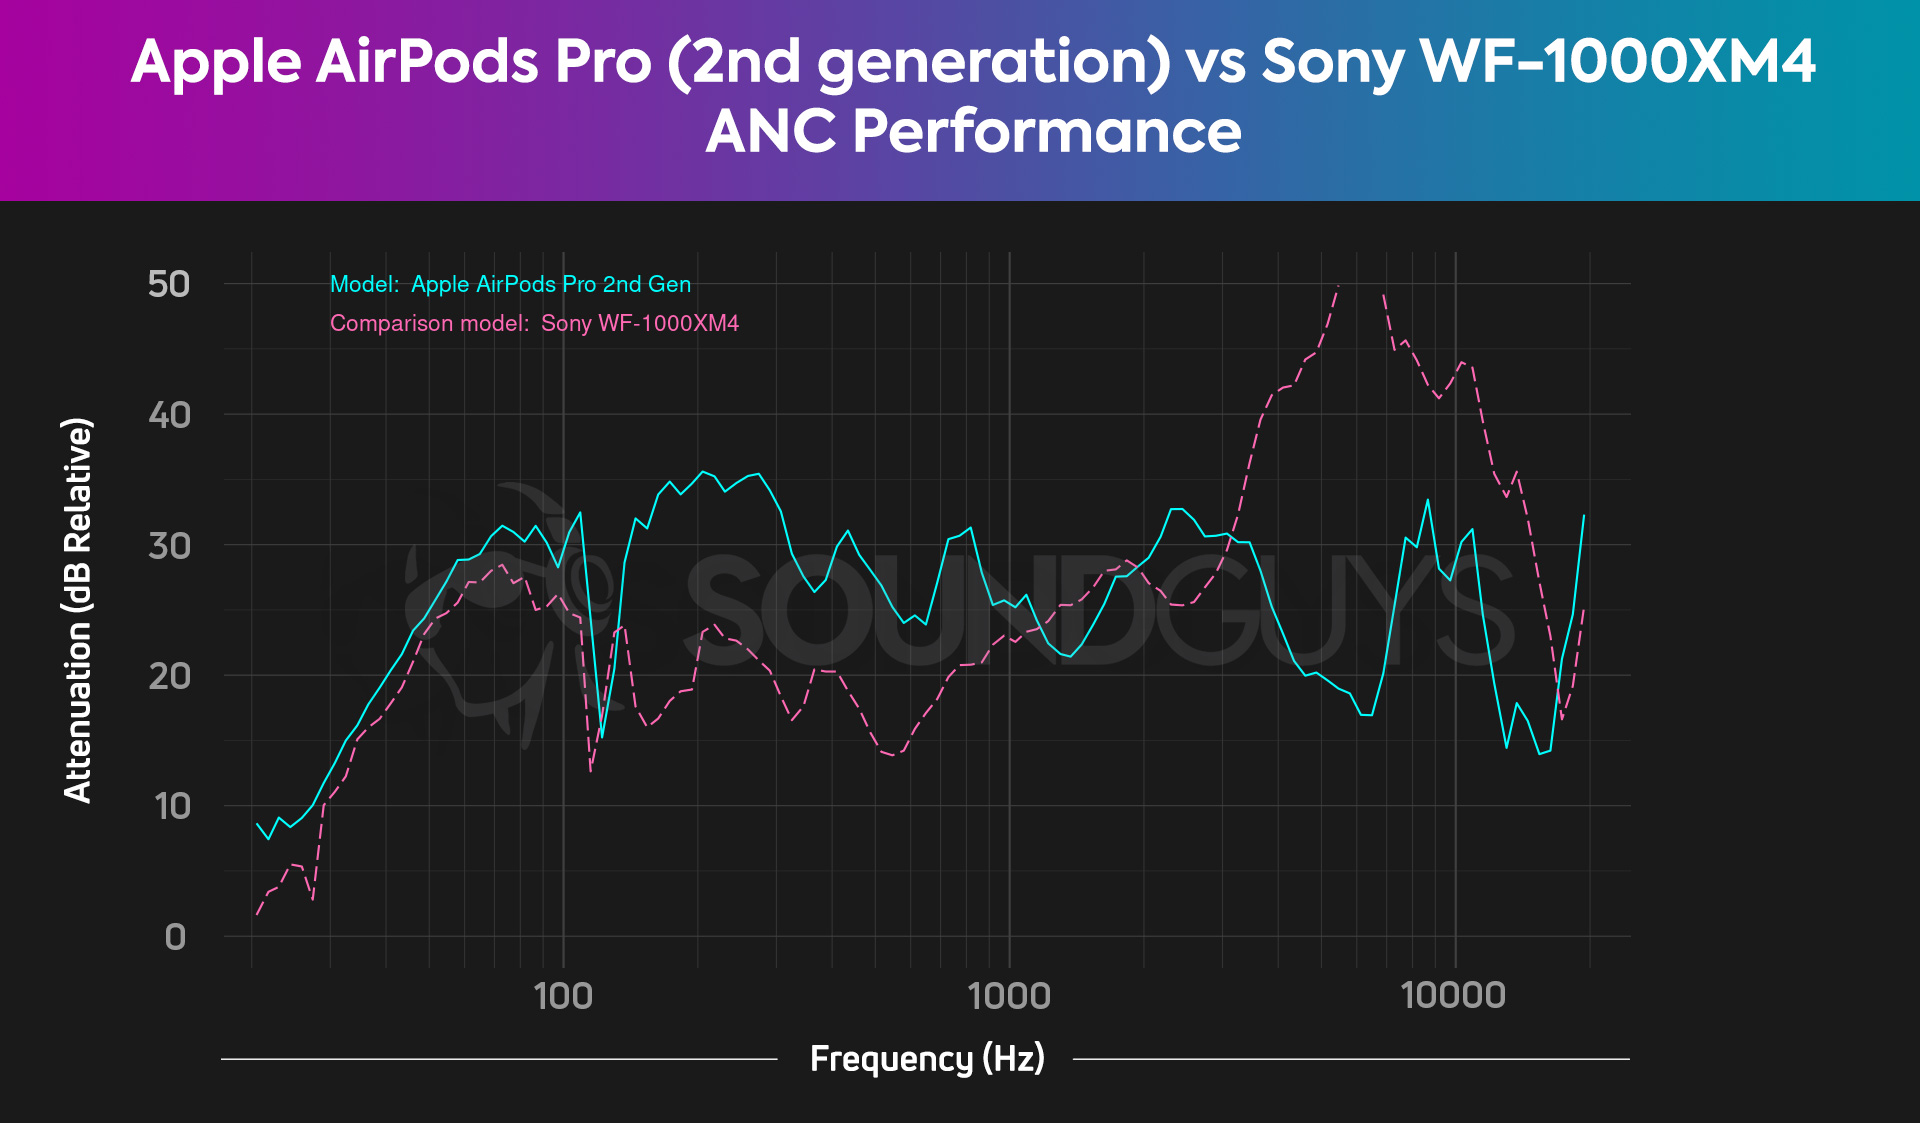 A chart compares the noise canceling of the AirPods Pro (2nd gen) to the Sony WF-1000XM4, revealing the AirPods Pro has slightly better midrange ANC.